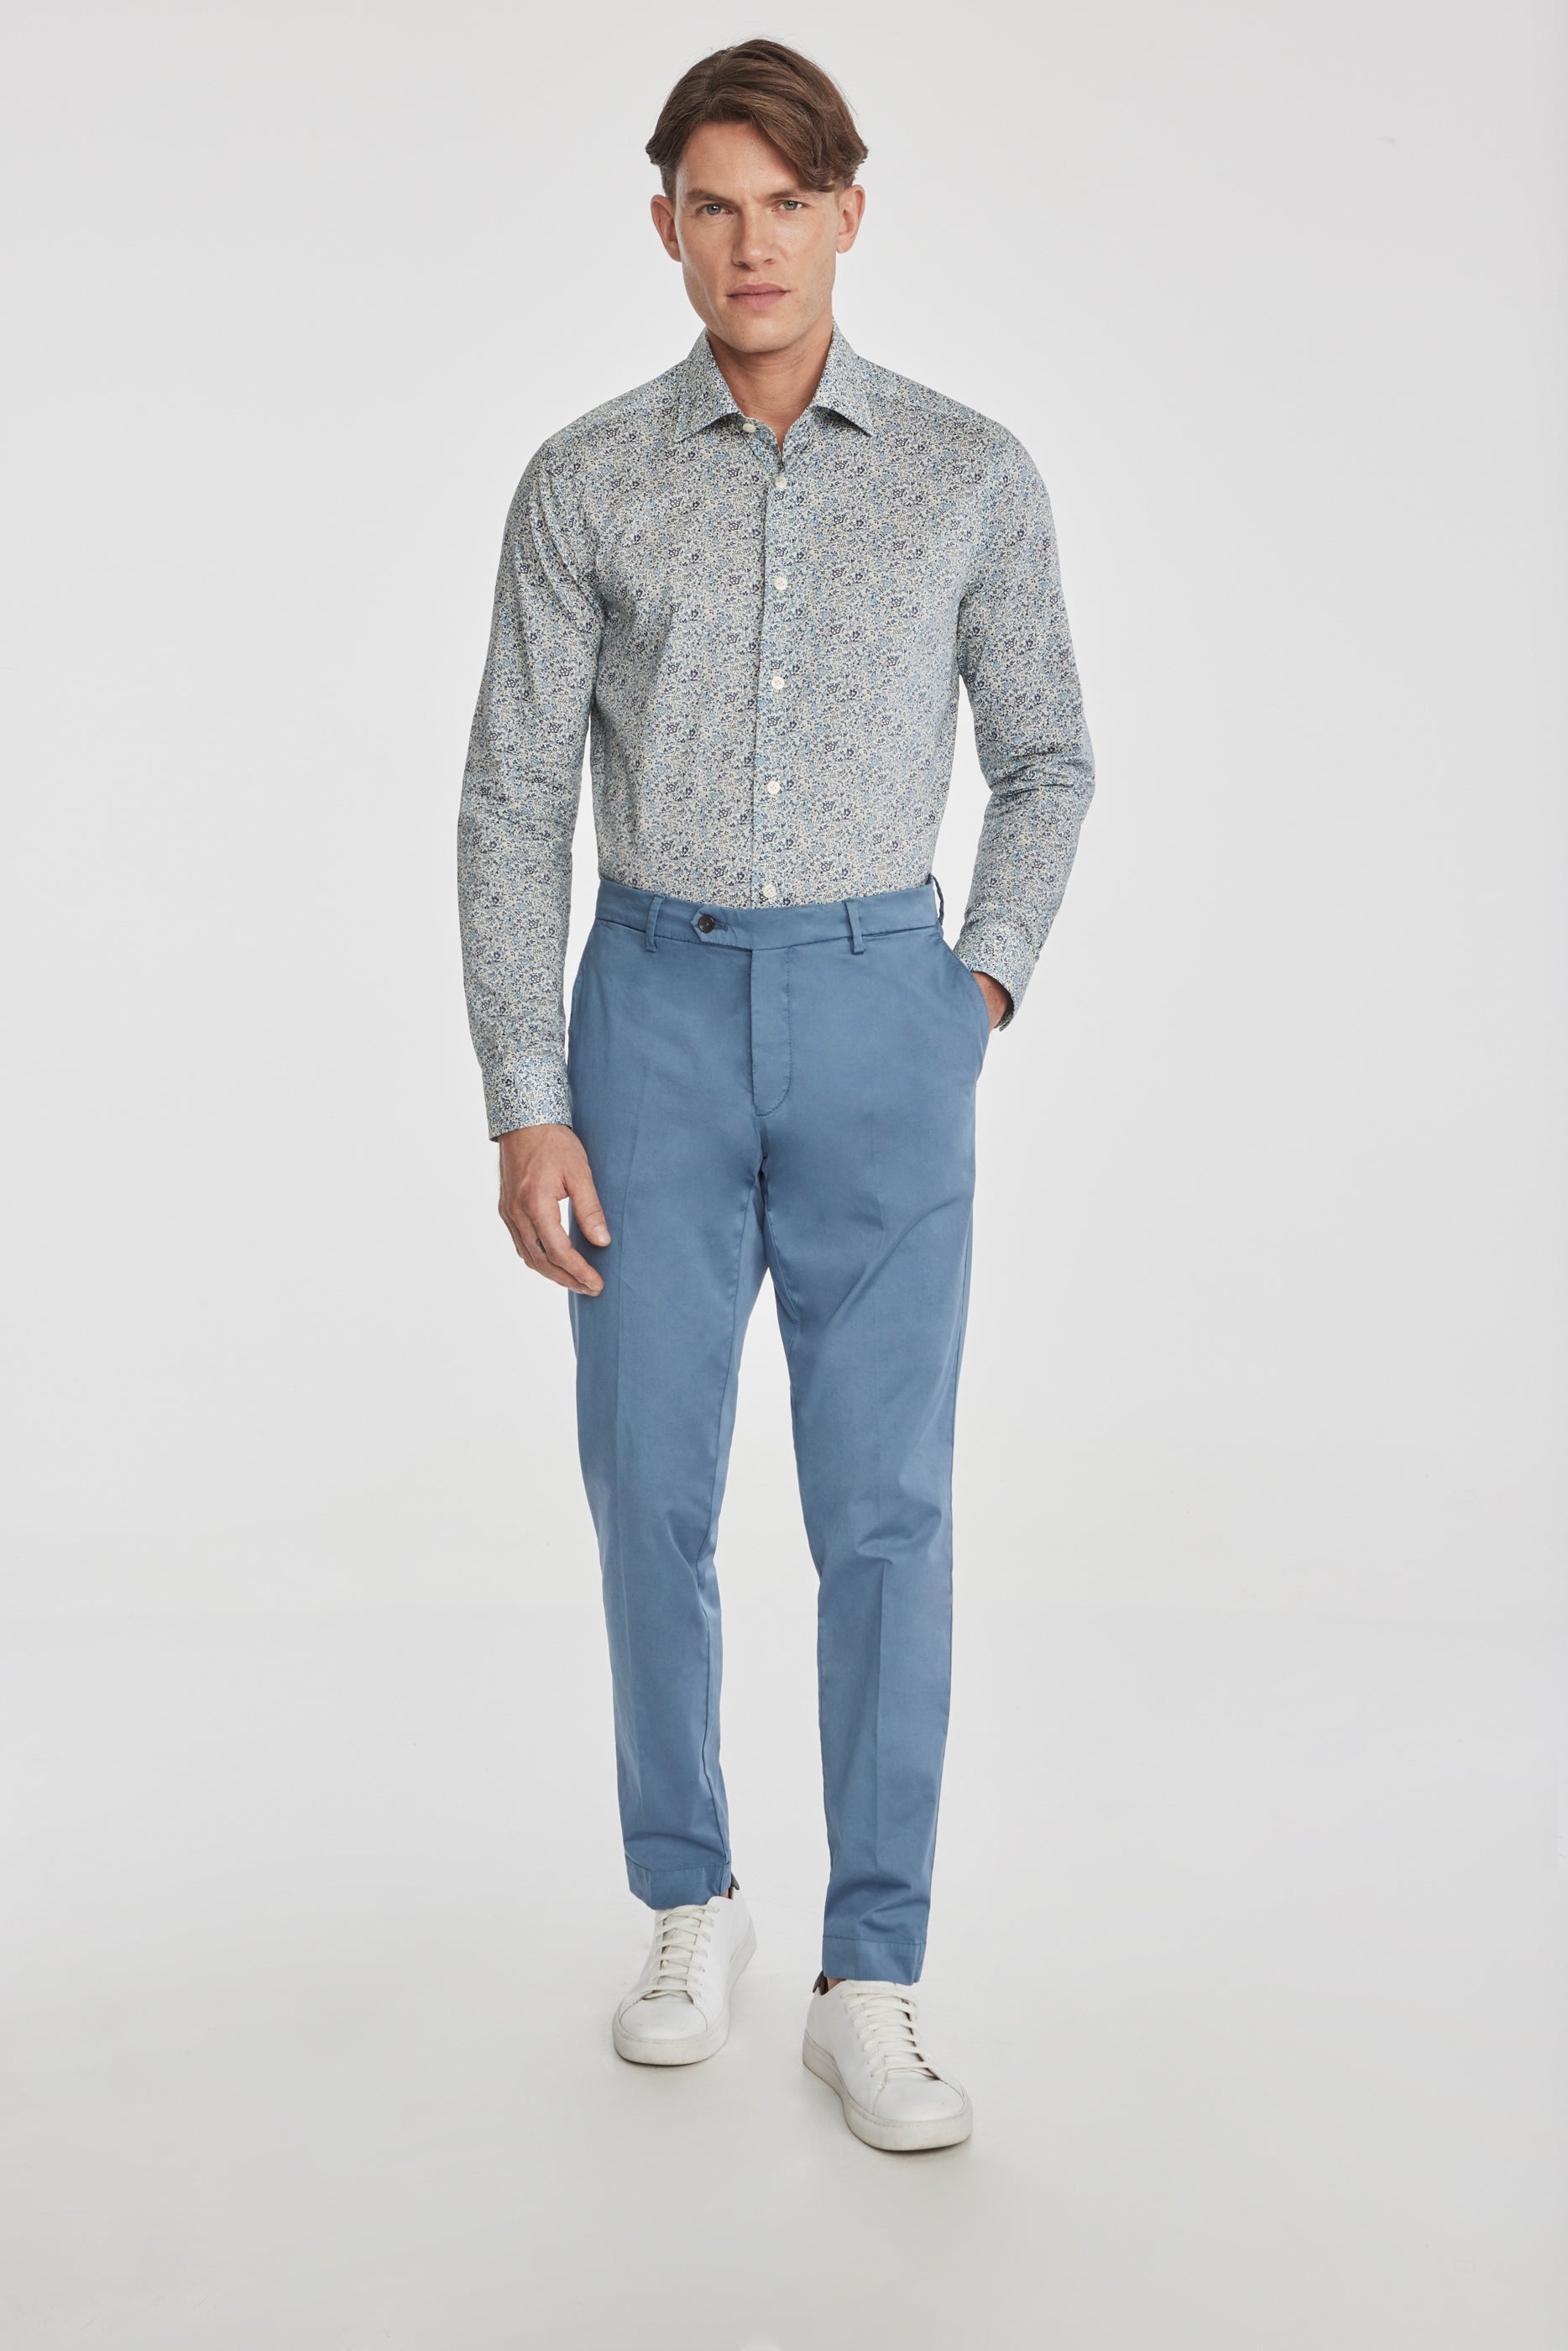 Alt view 1 Jace Cotton Stretch Chino in Light Blue